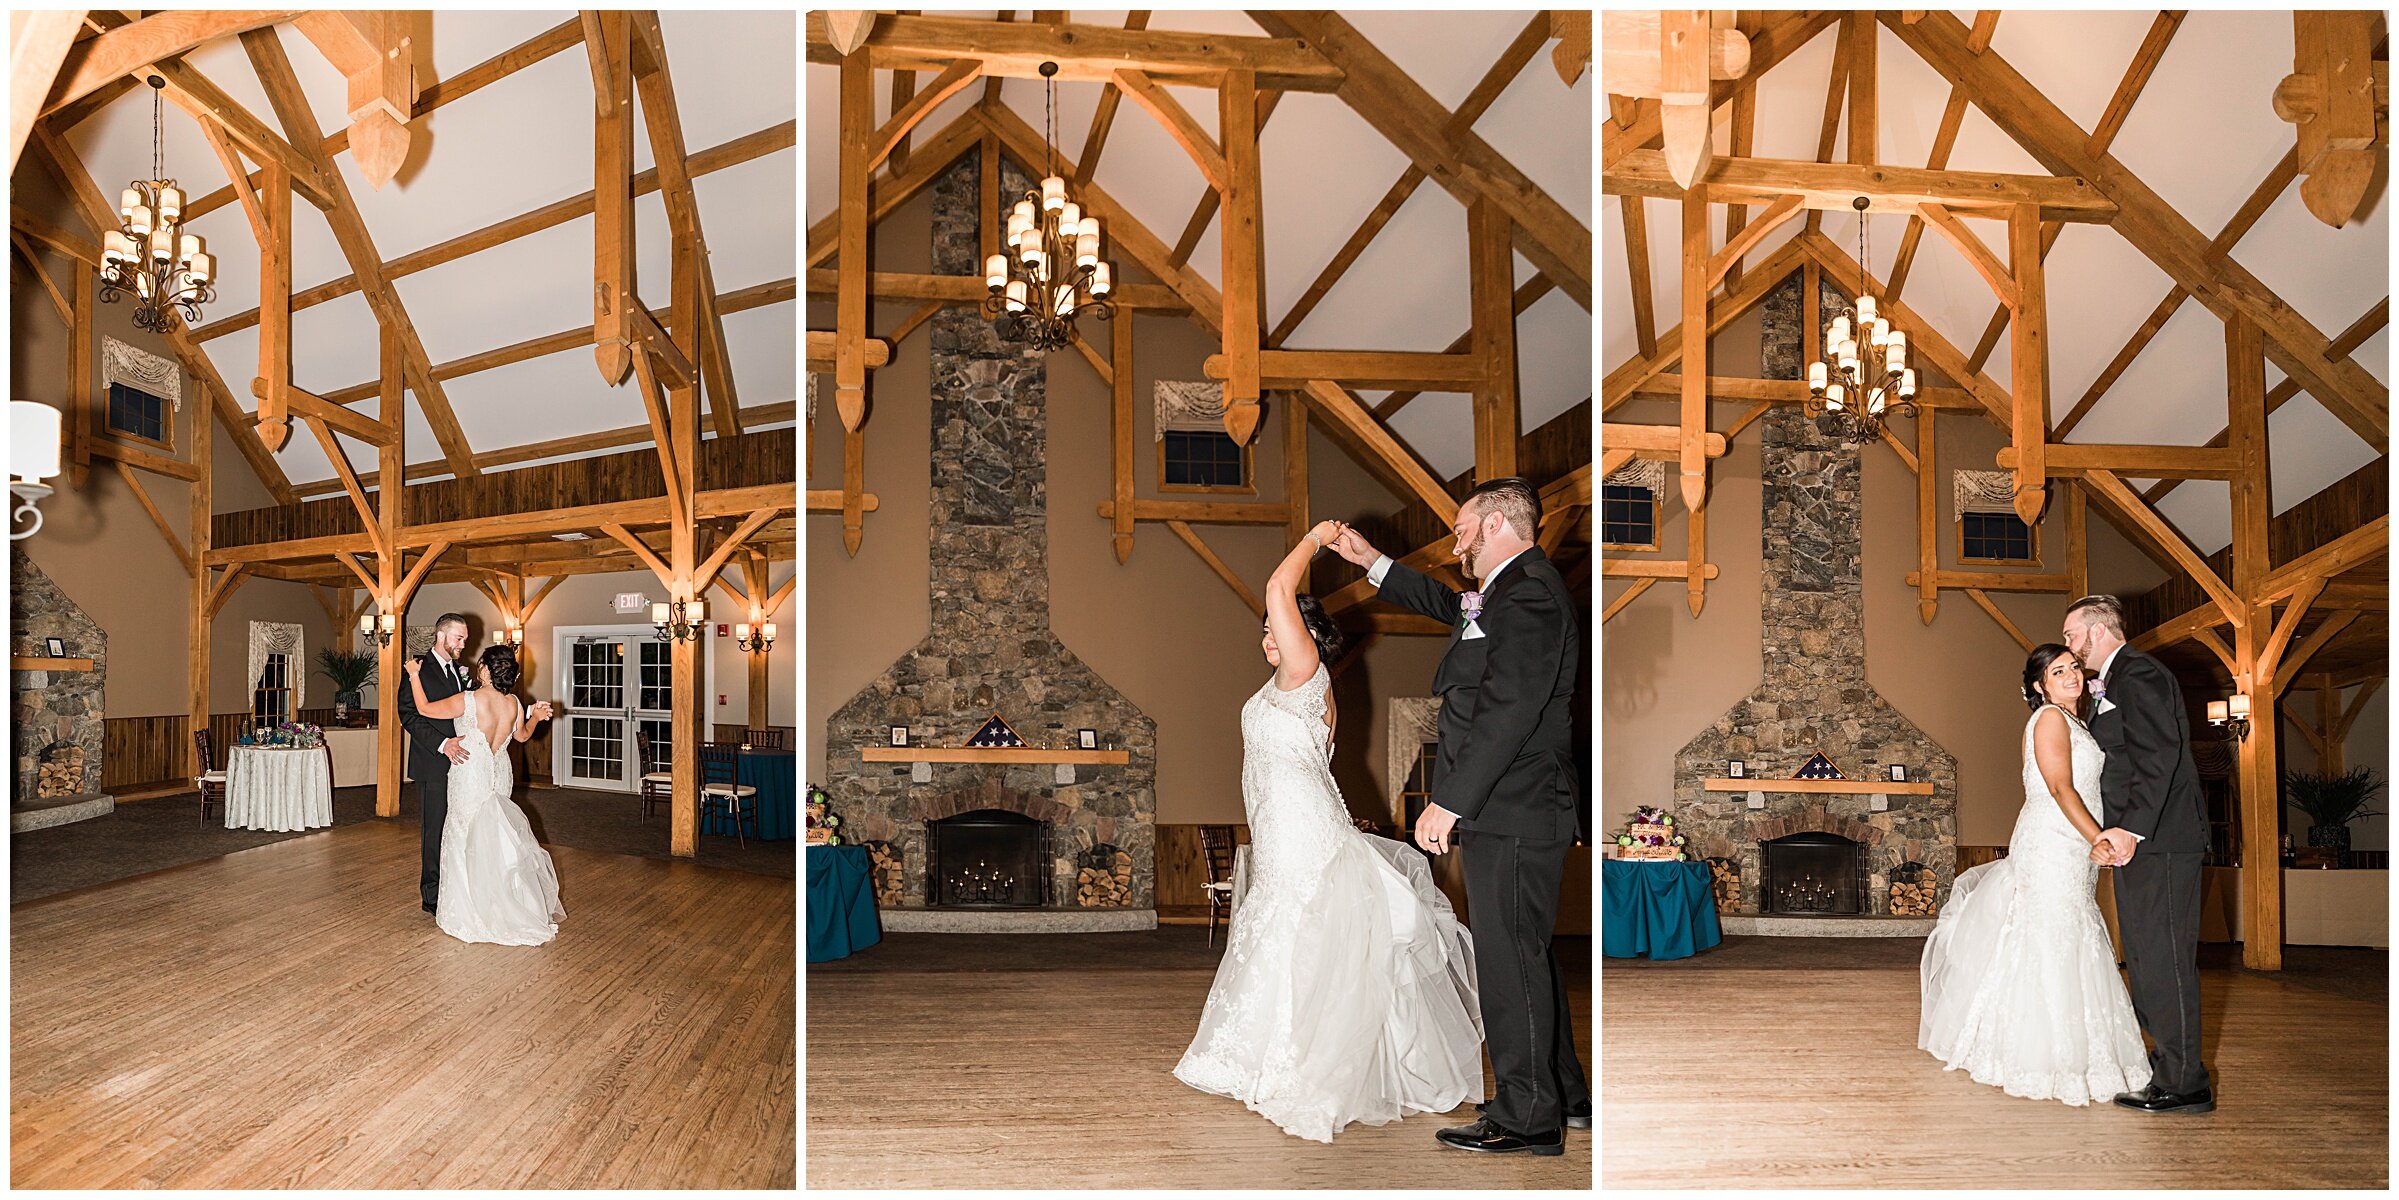 First dance as Mr. &amp; Mrs.